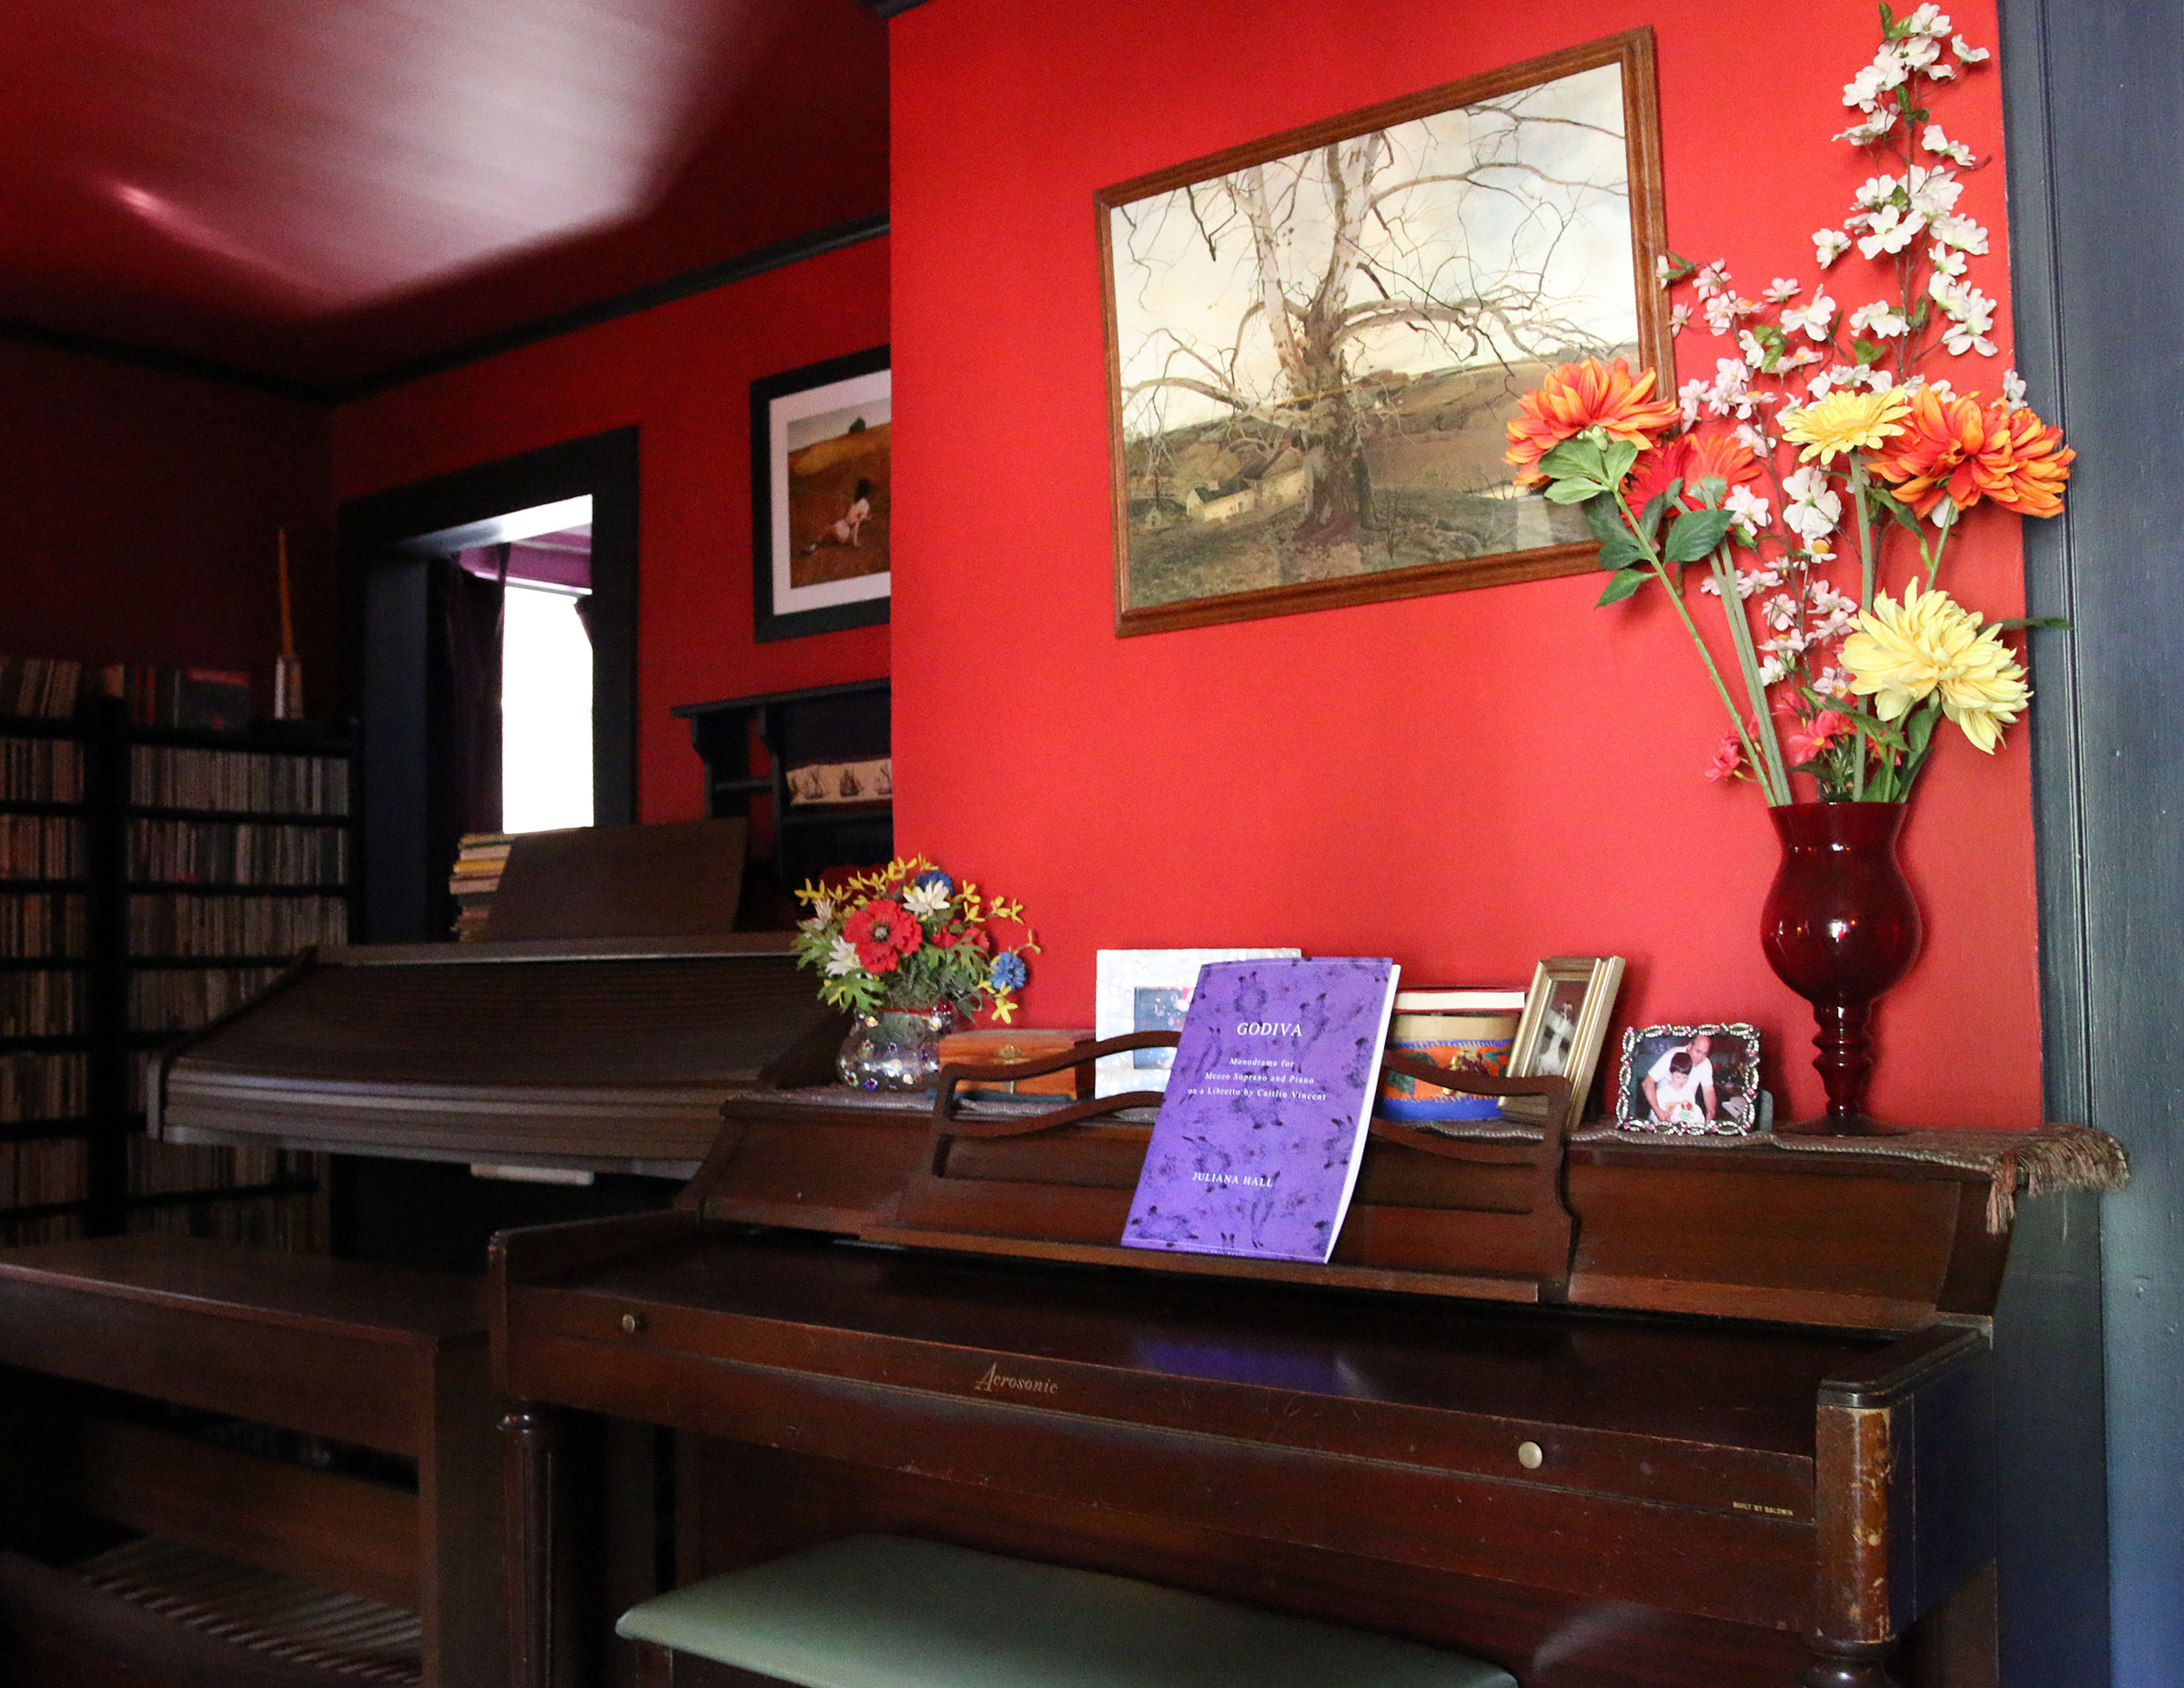 An organ and an upright piano sit side by side in Juliana Hall's living room.